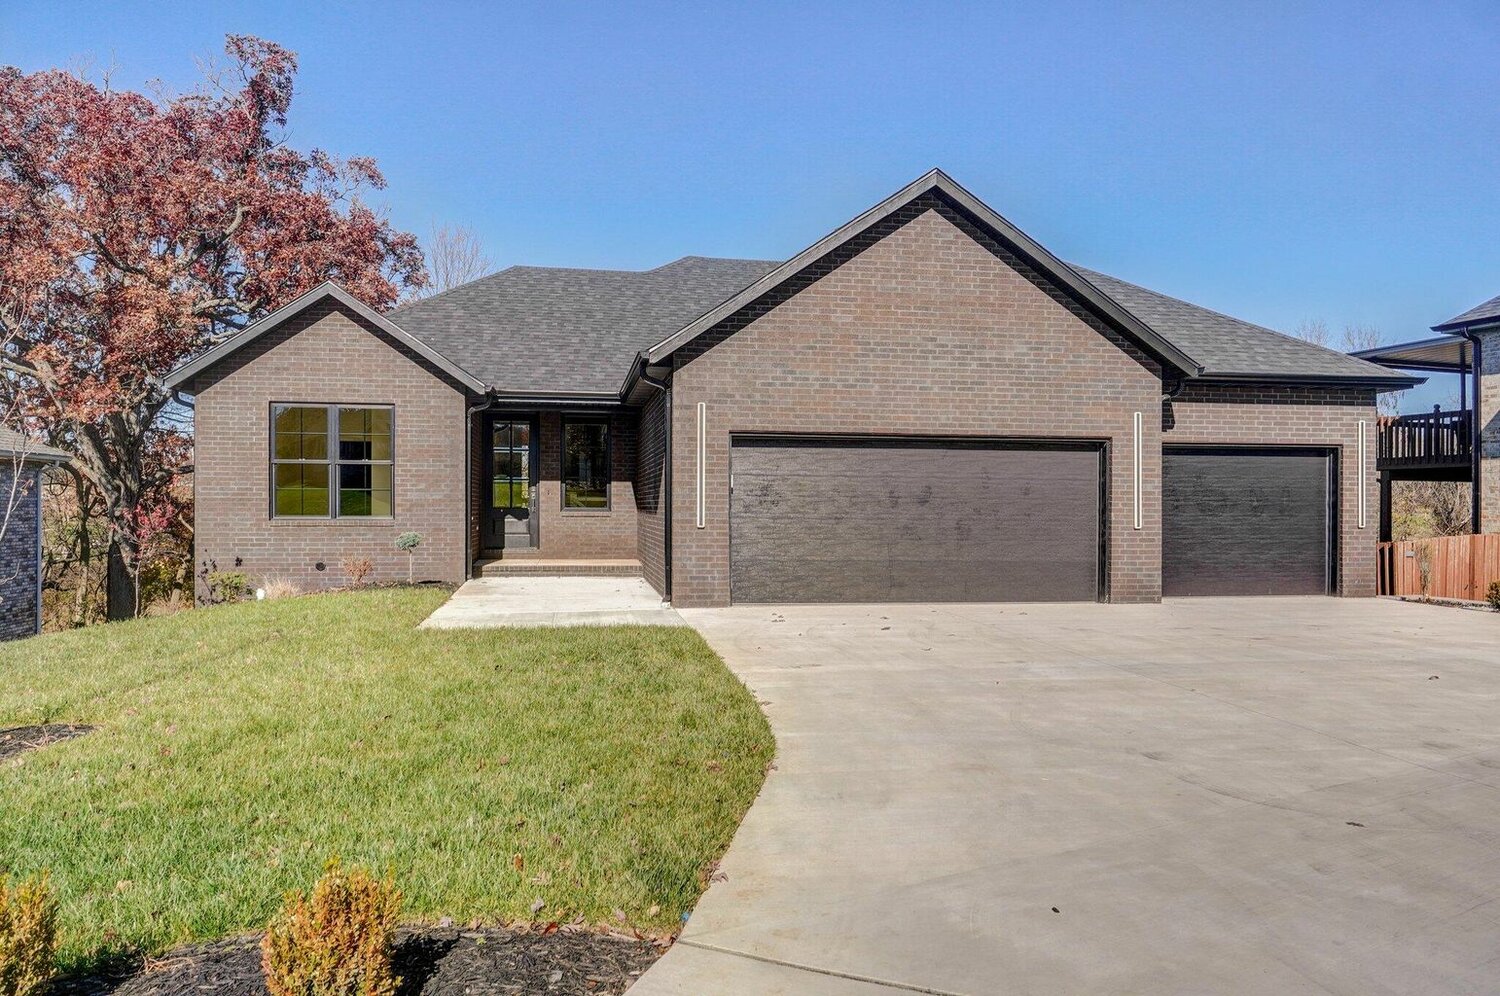 4823 E. Eastmoor St.
$574,900
Bedrooms: 4
Bathrooms: 4
Listing firm: Alpha Realty MO LLC